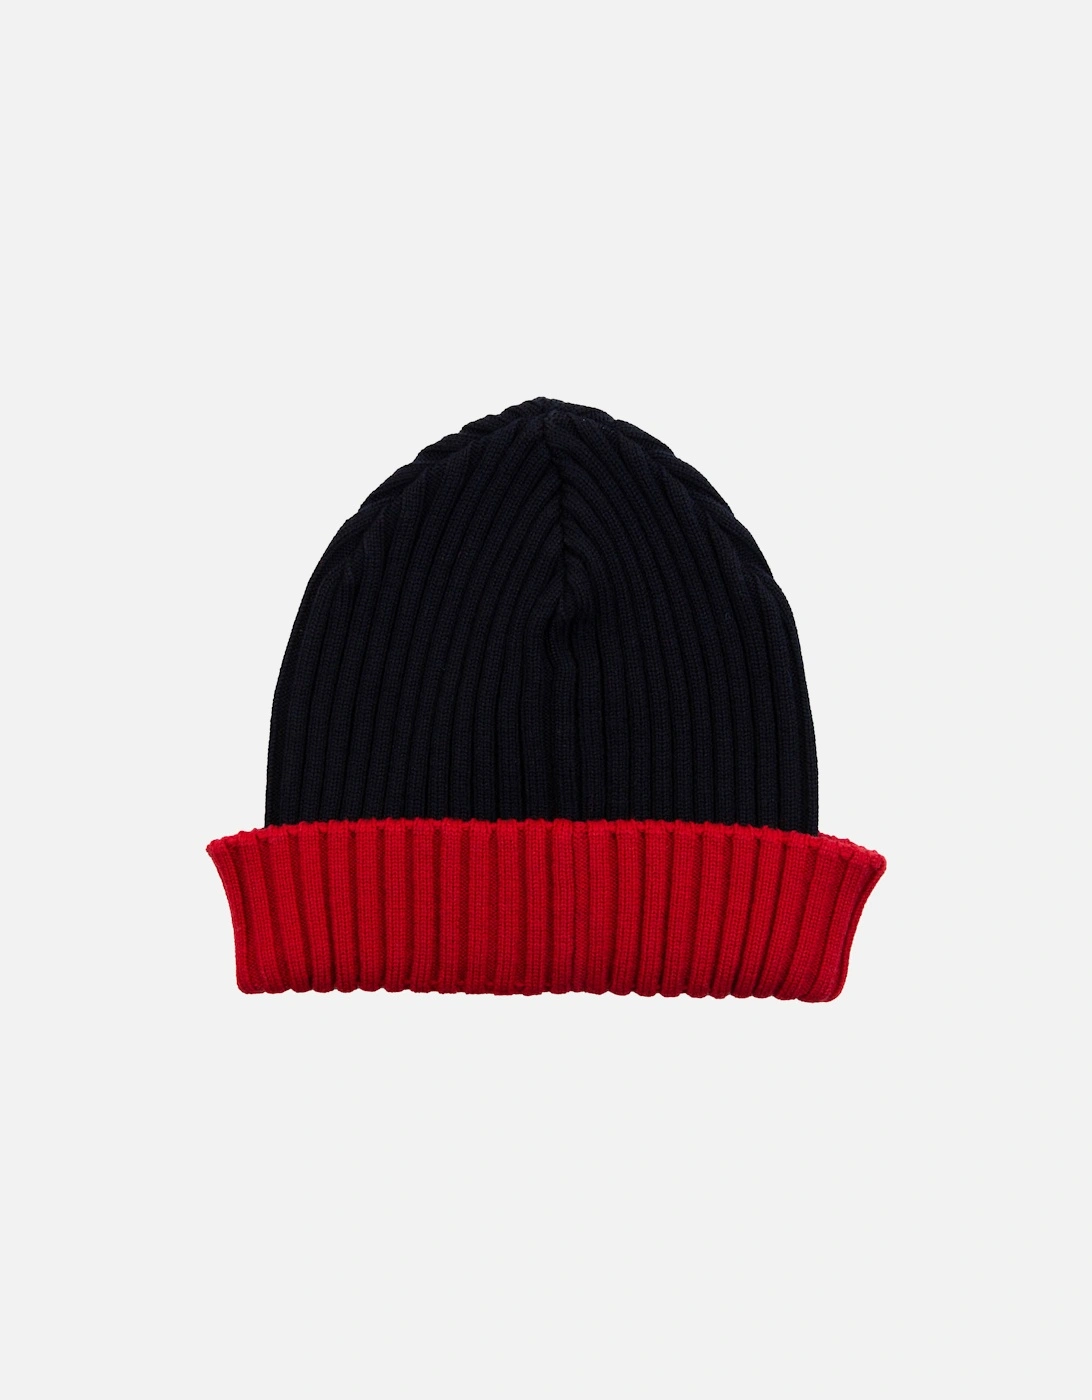 Mens Watershed Knit Hat (Navy/Red)